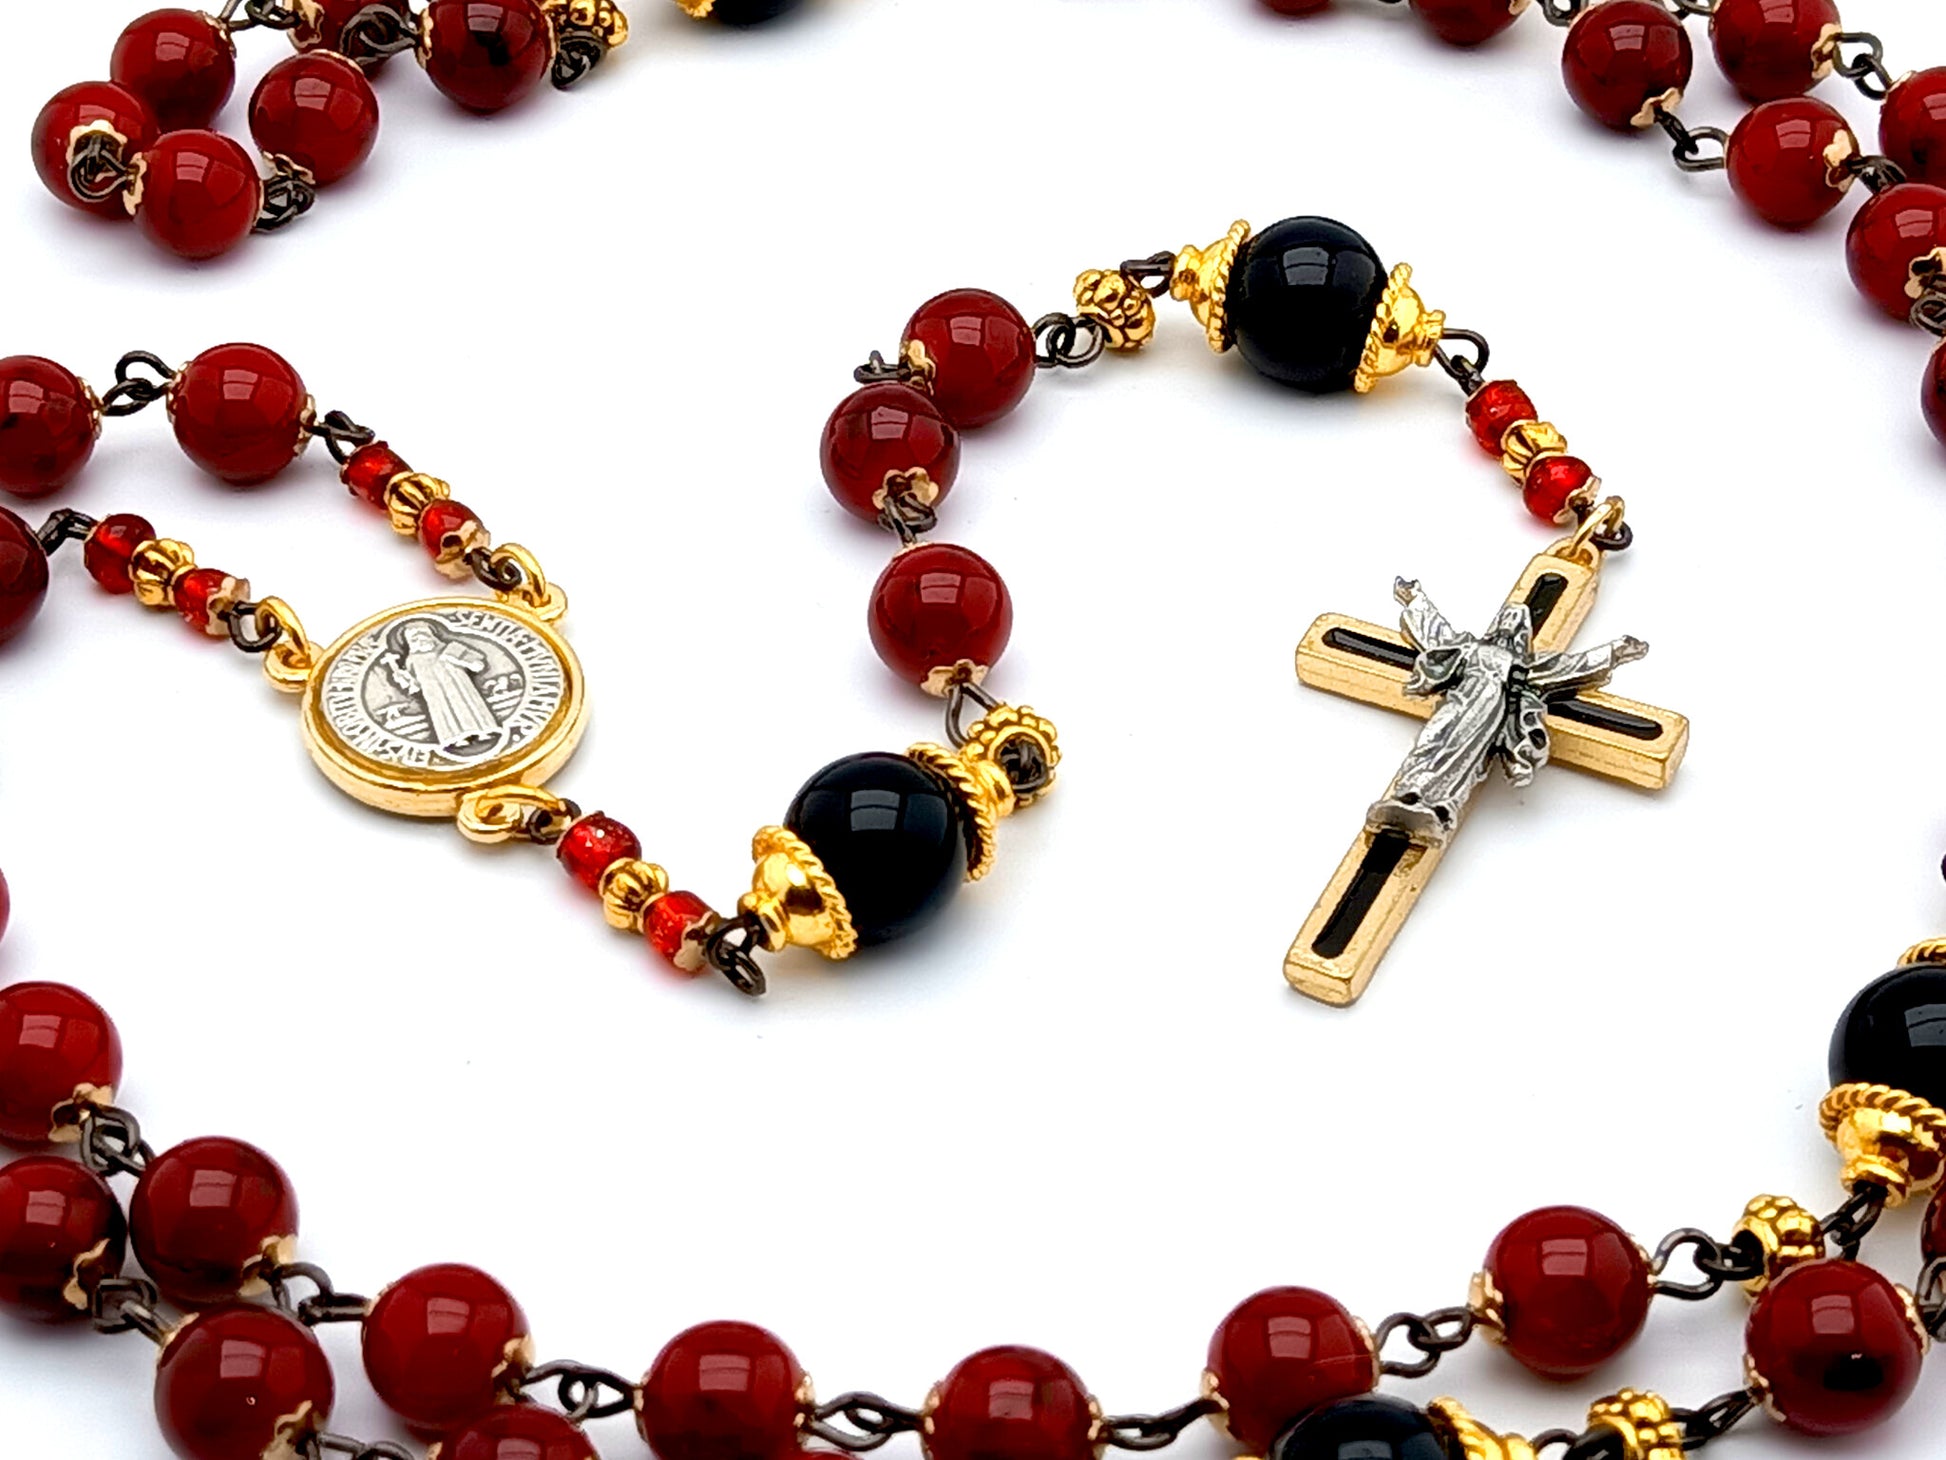 The Resurrection unique rosary beads with deep red and black glass beads, gold and black enamel crucifix and centre medal.